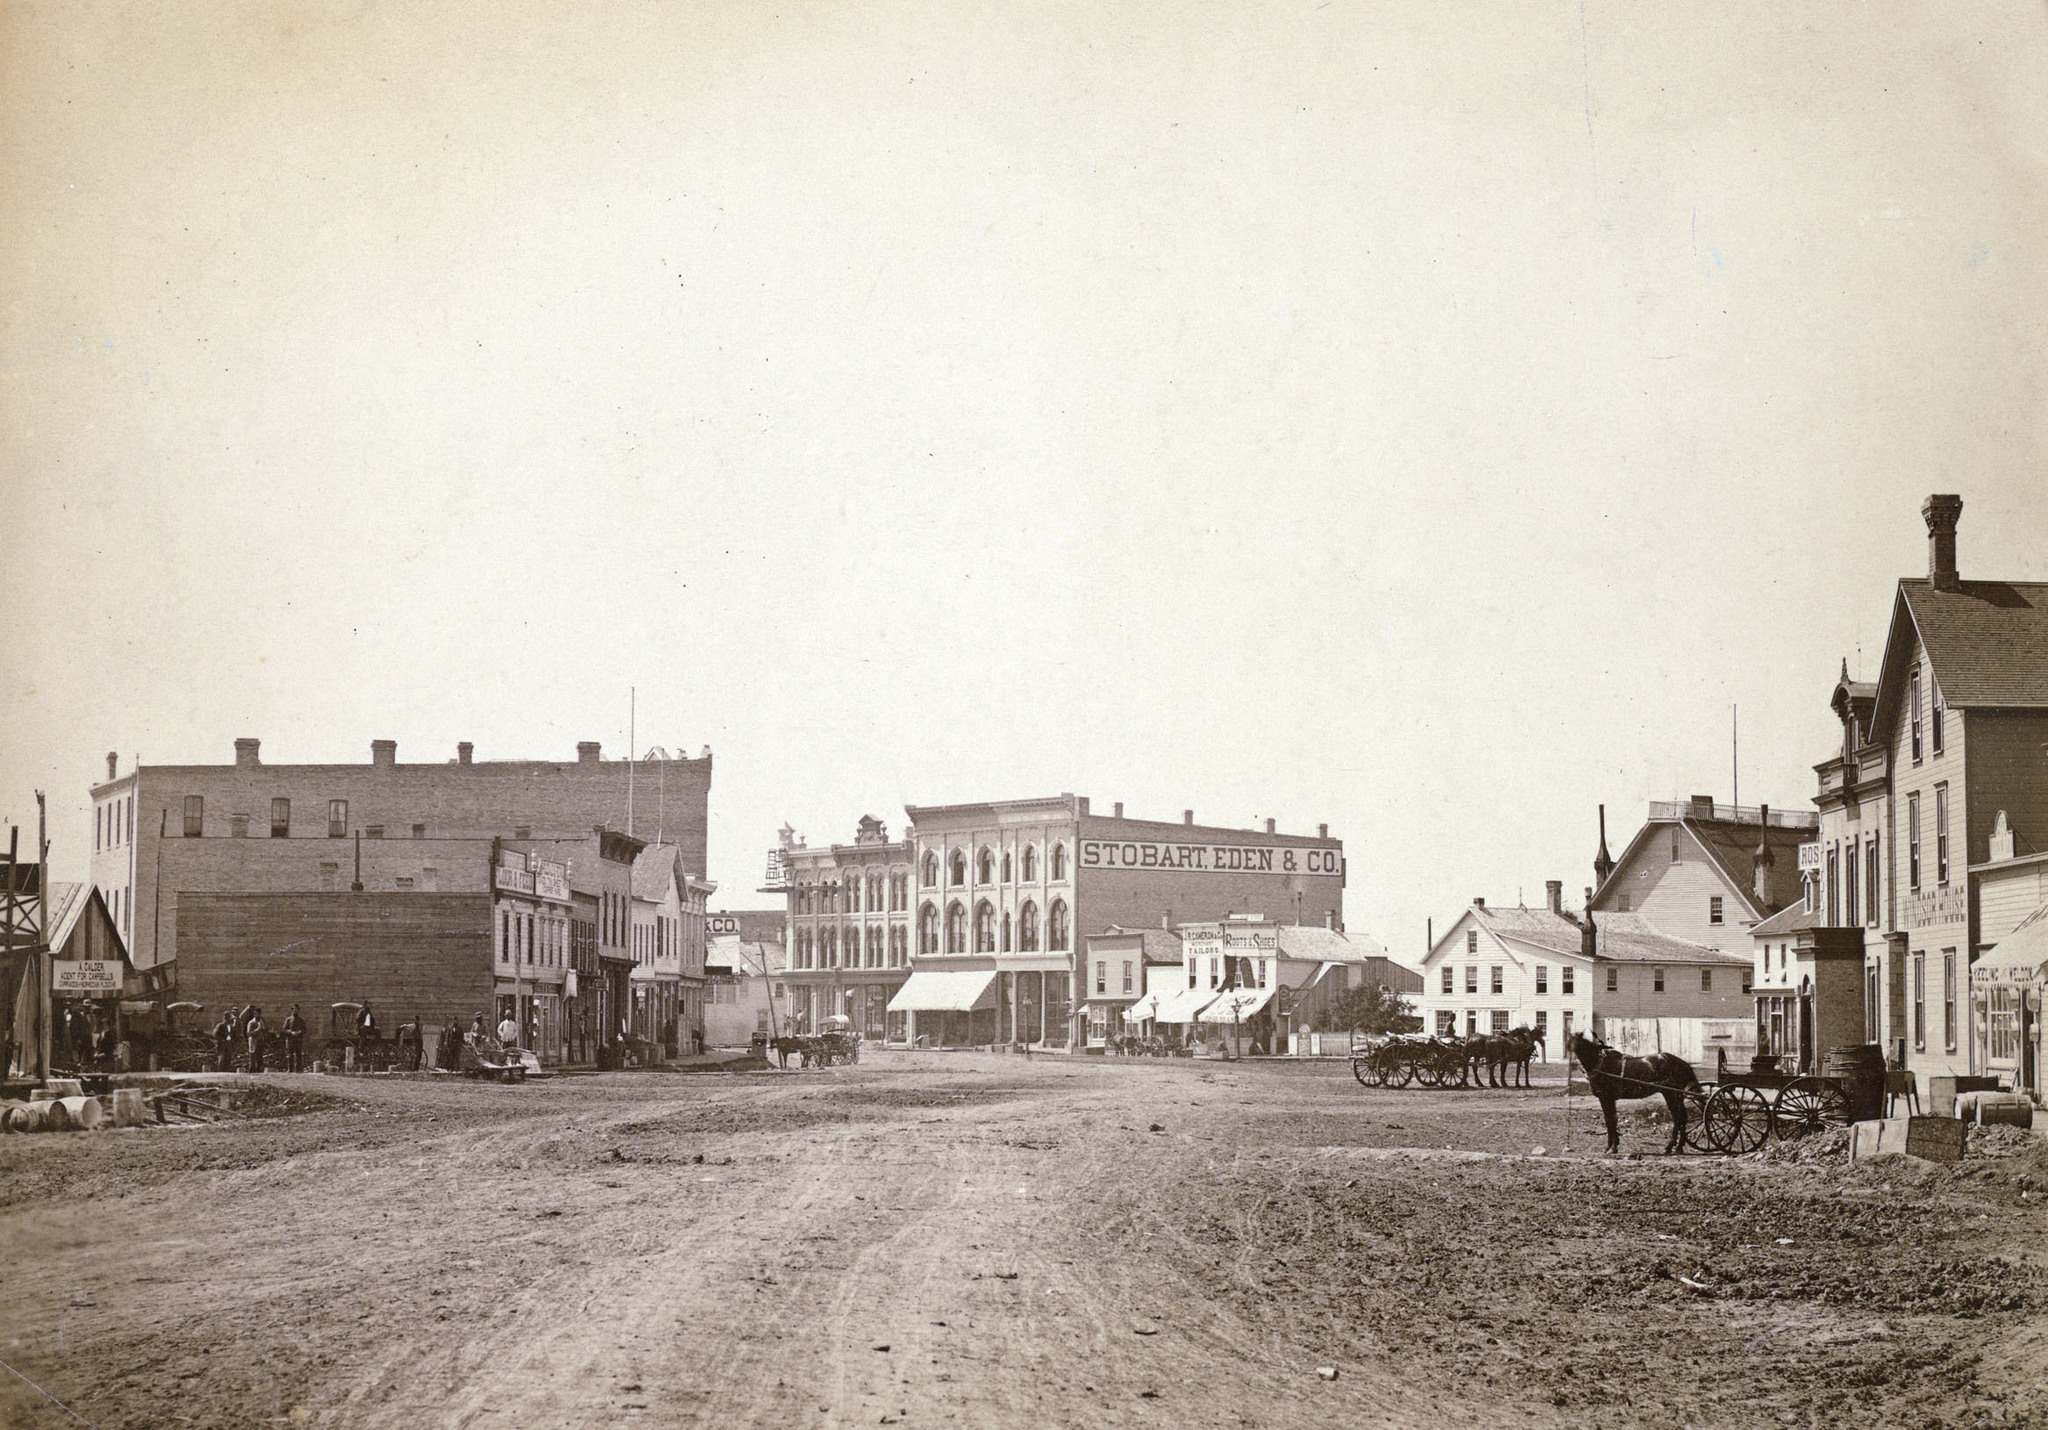 Winnipeg 1870 Main Street looking south from the market. ISRAEL BENNETTO & CO 